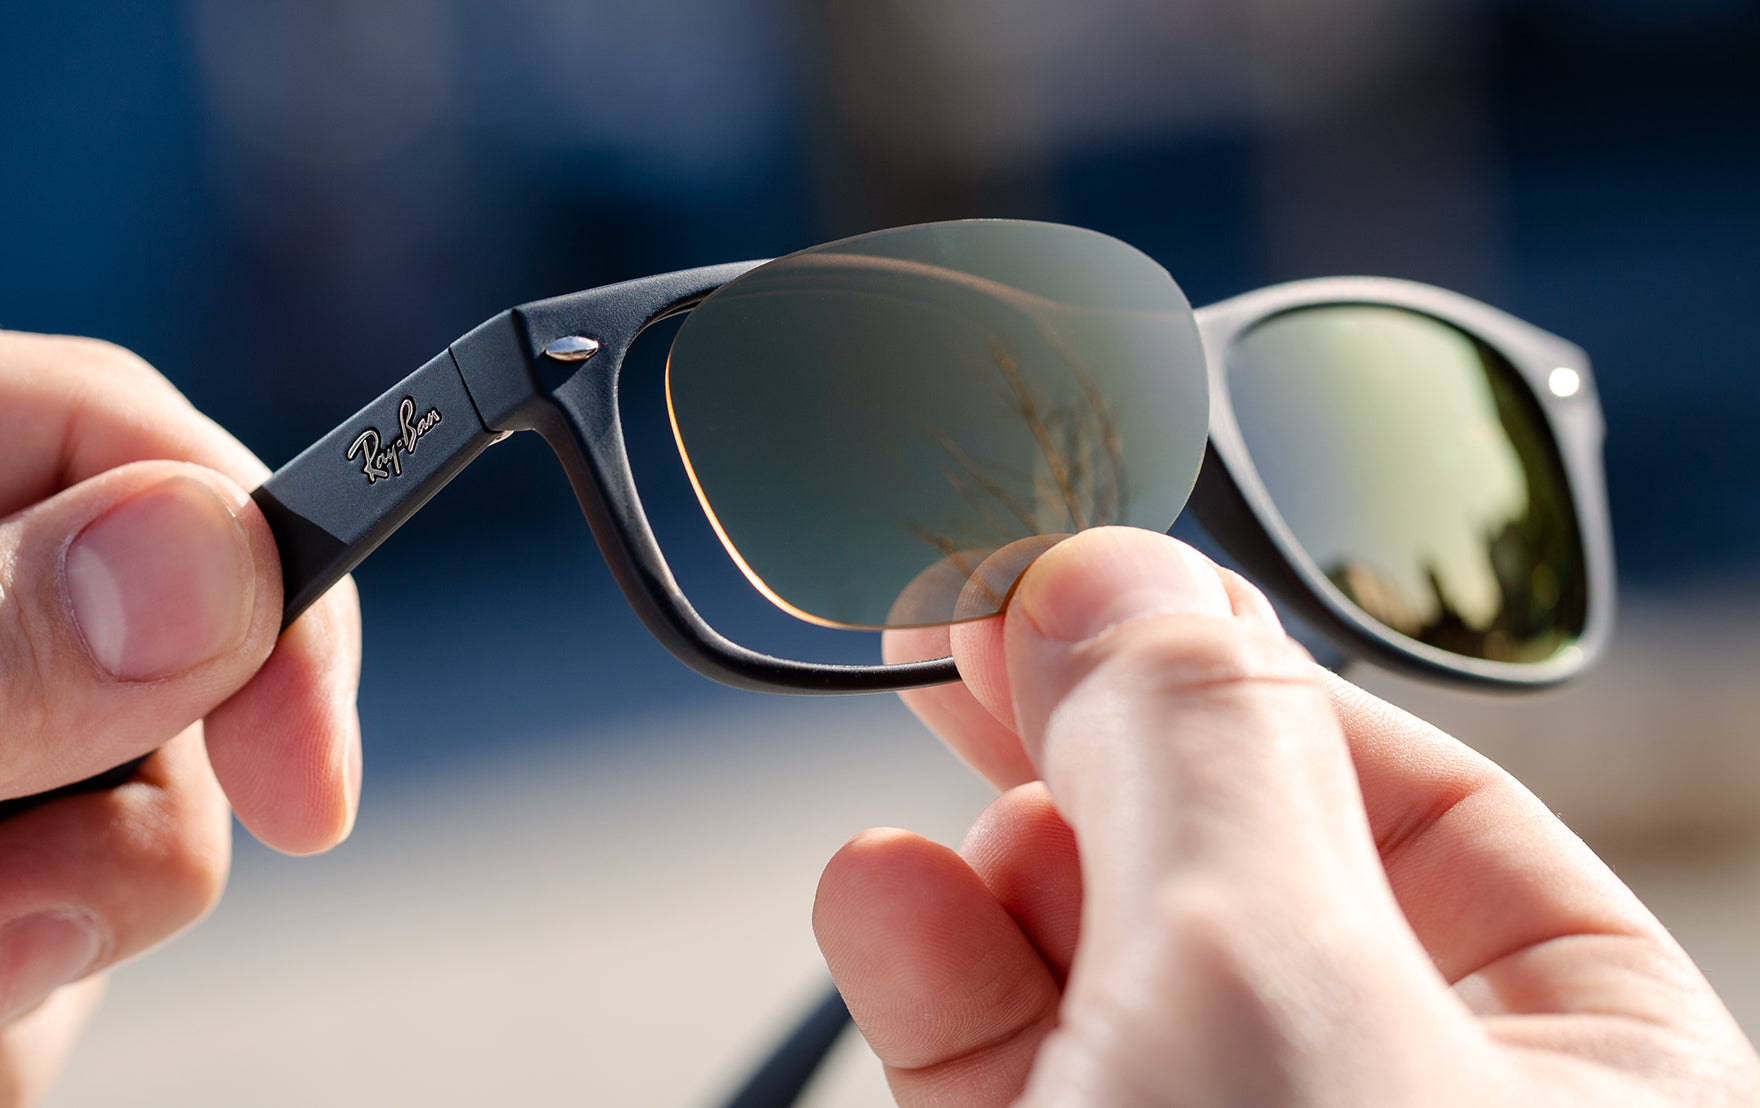 How To Replace Sunglass Lenses